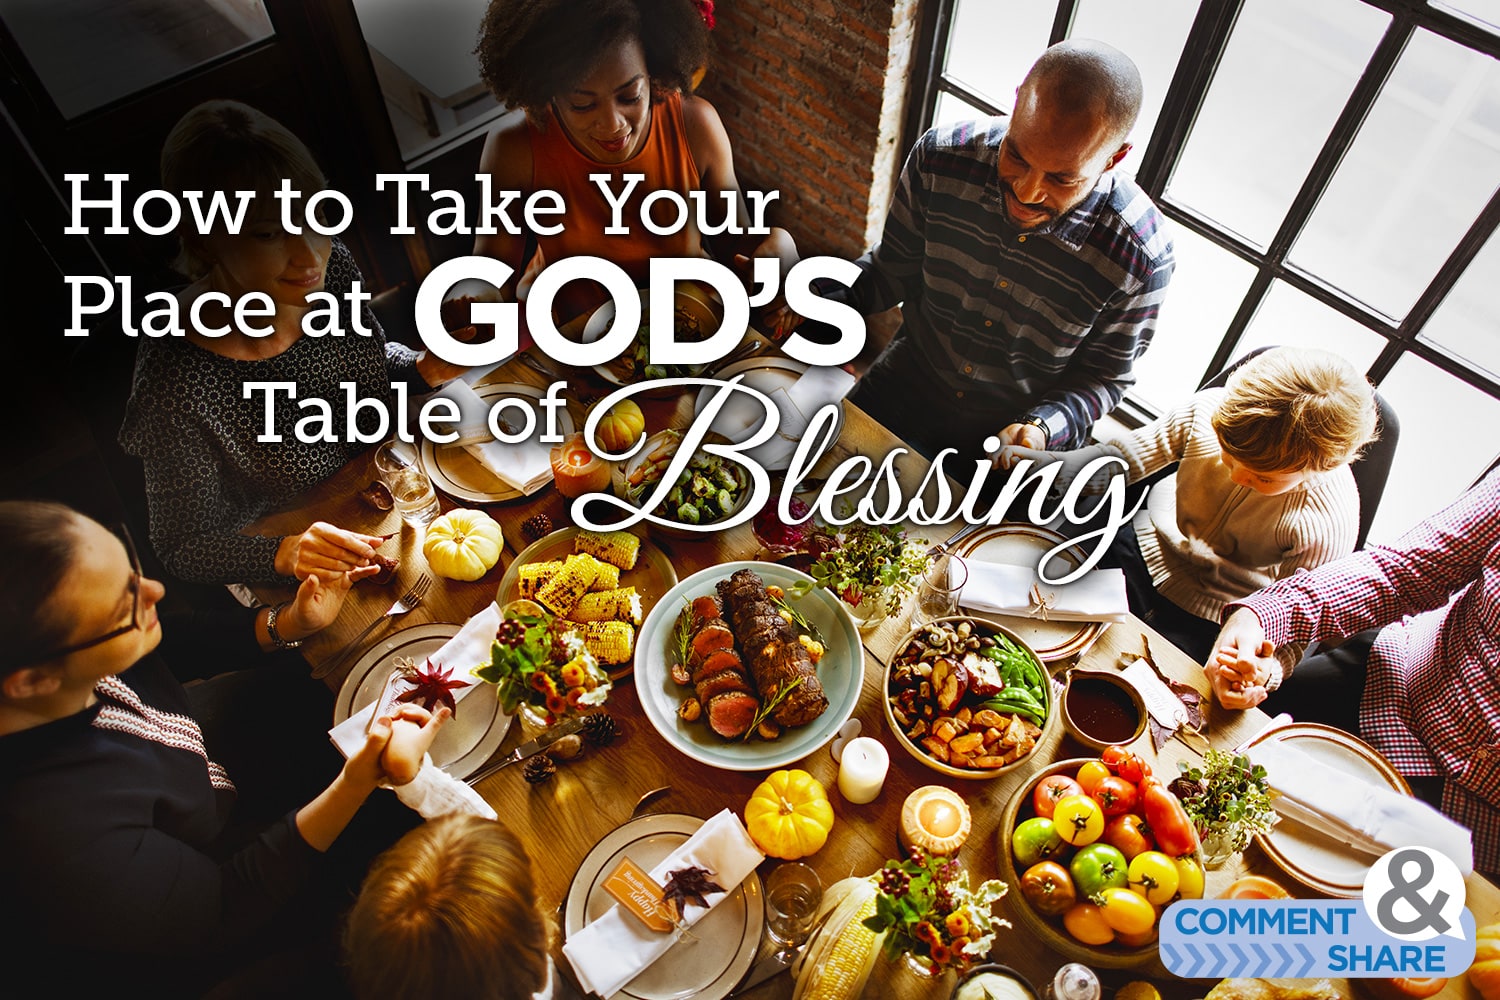 How to Take Your Place at God's Table of BLESSING